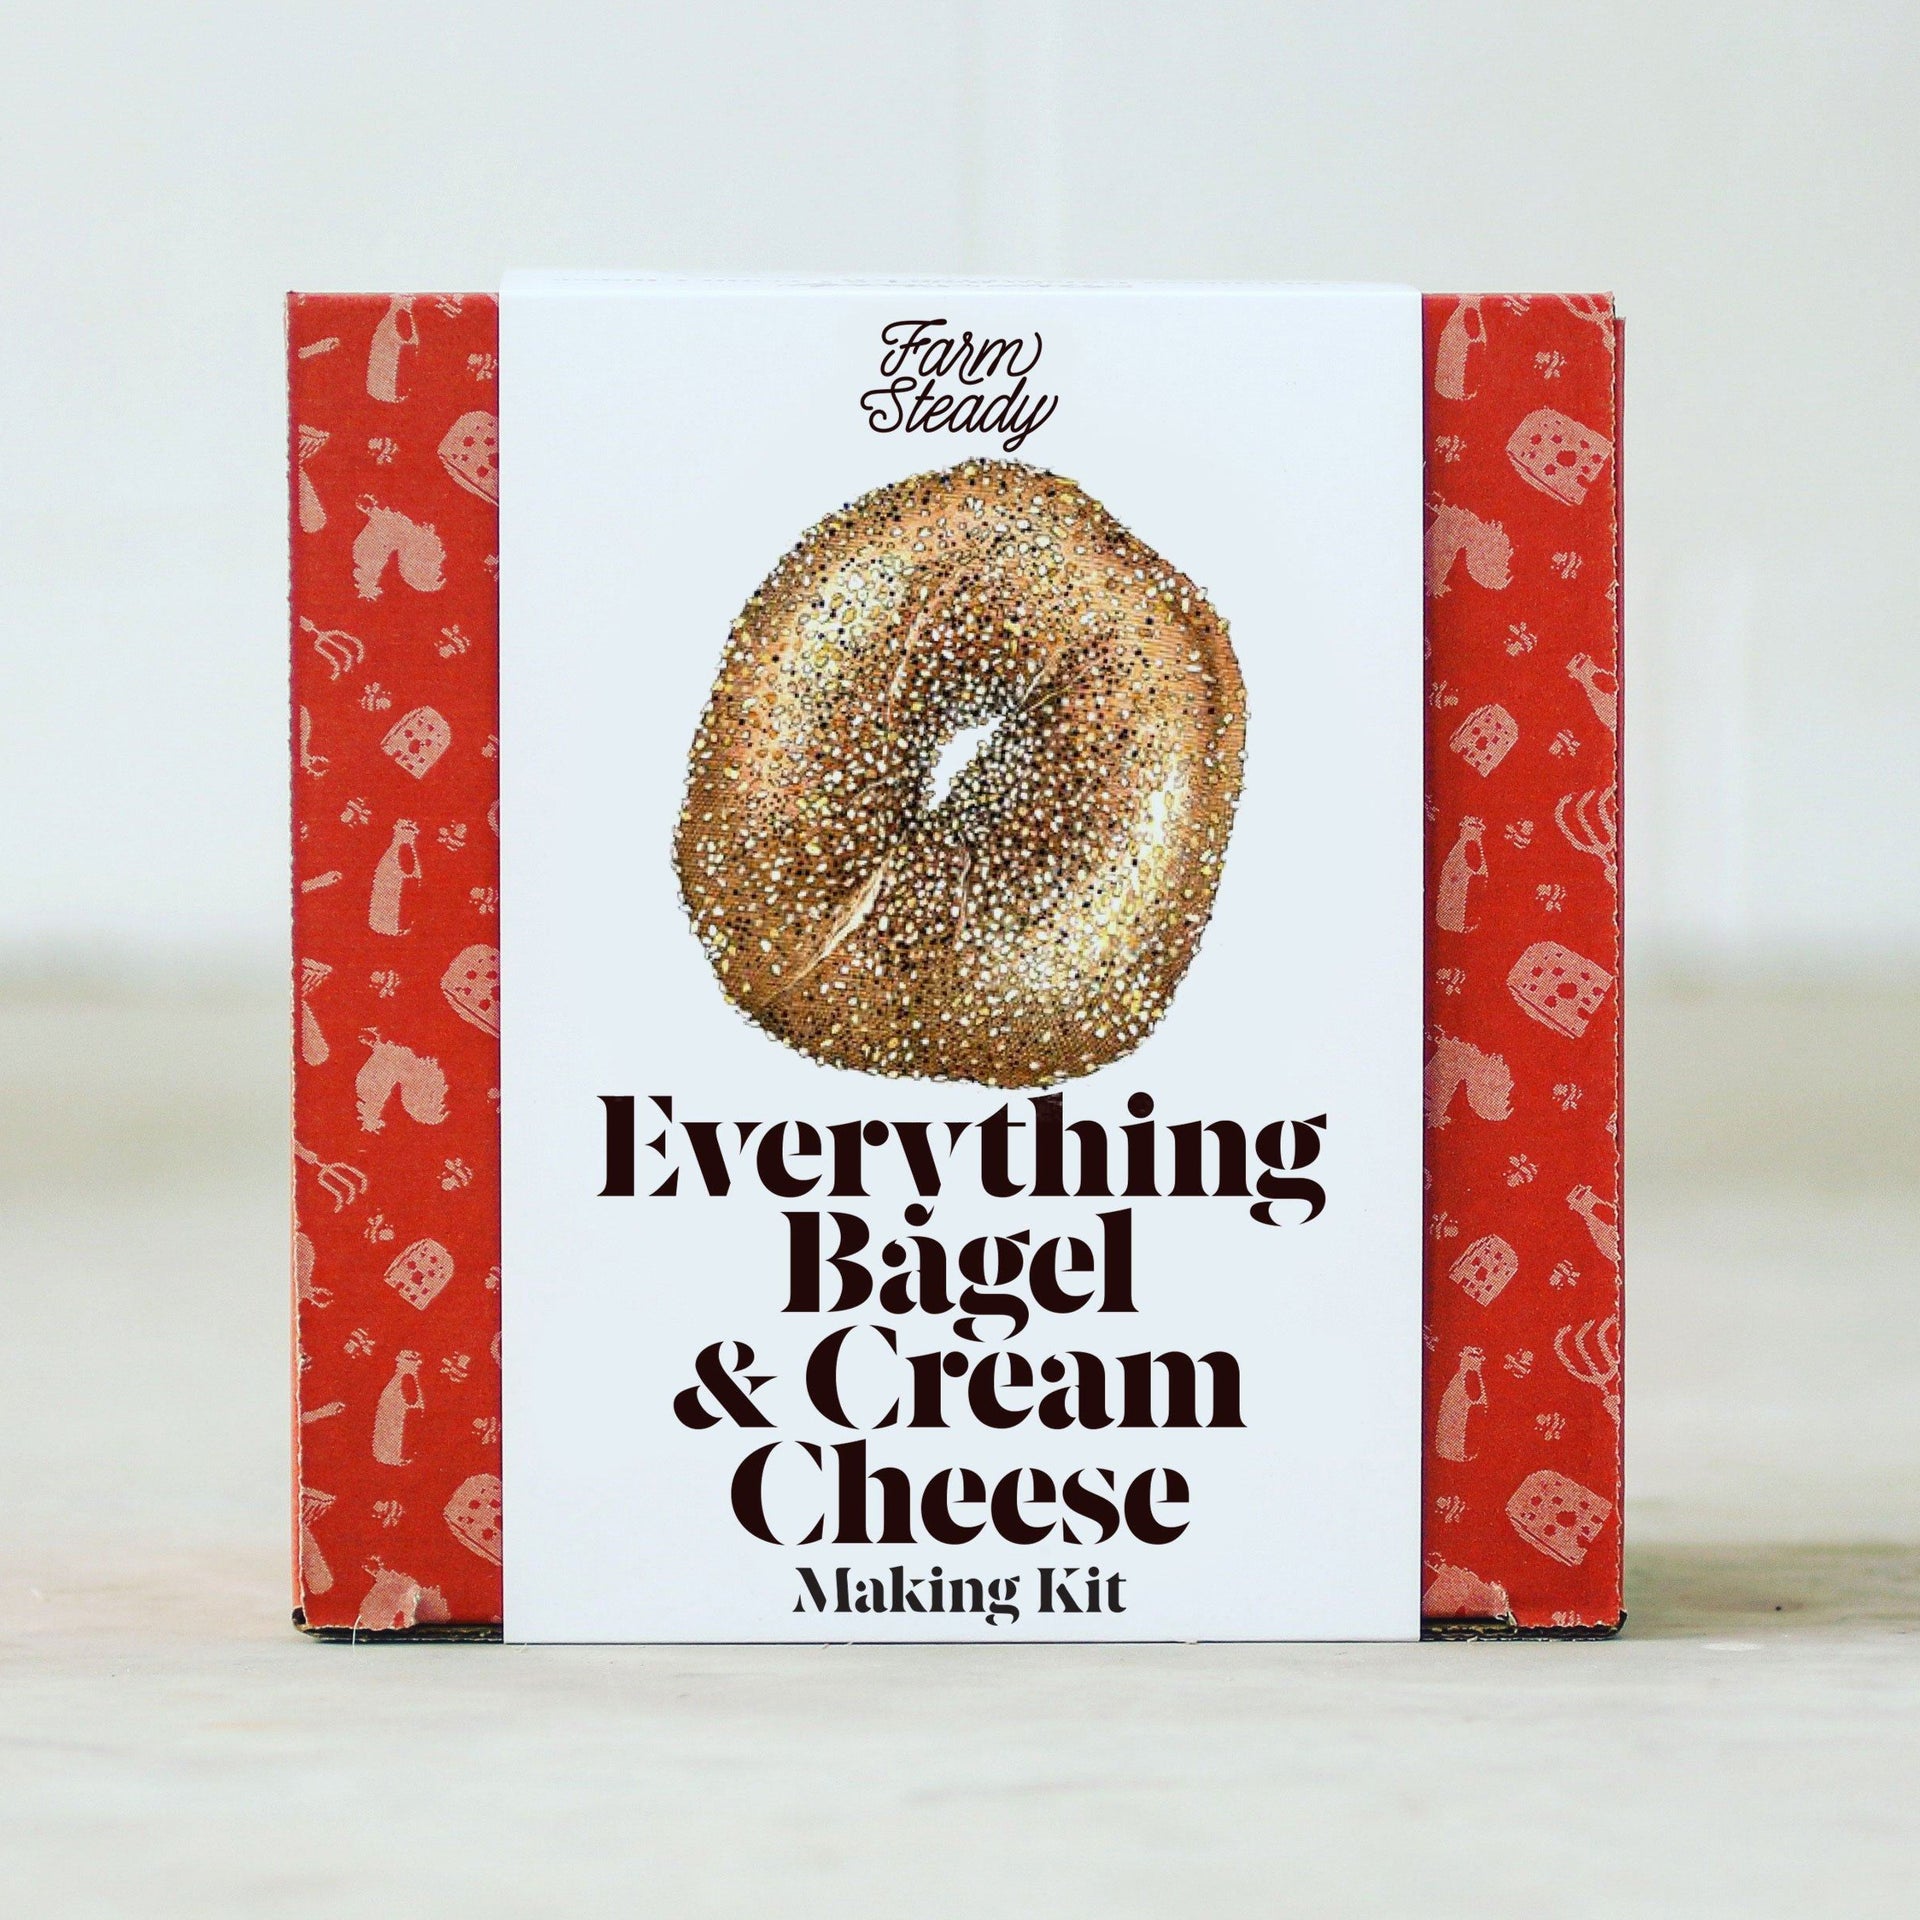 Farm Steady Food Default Everything Bagel and Cream Cheese Making Kit